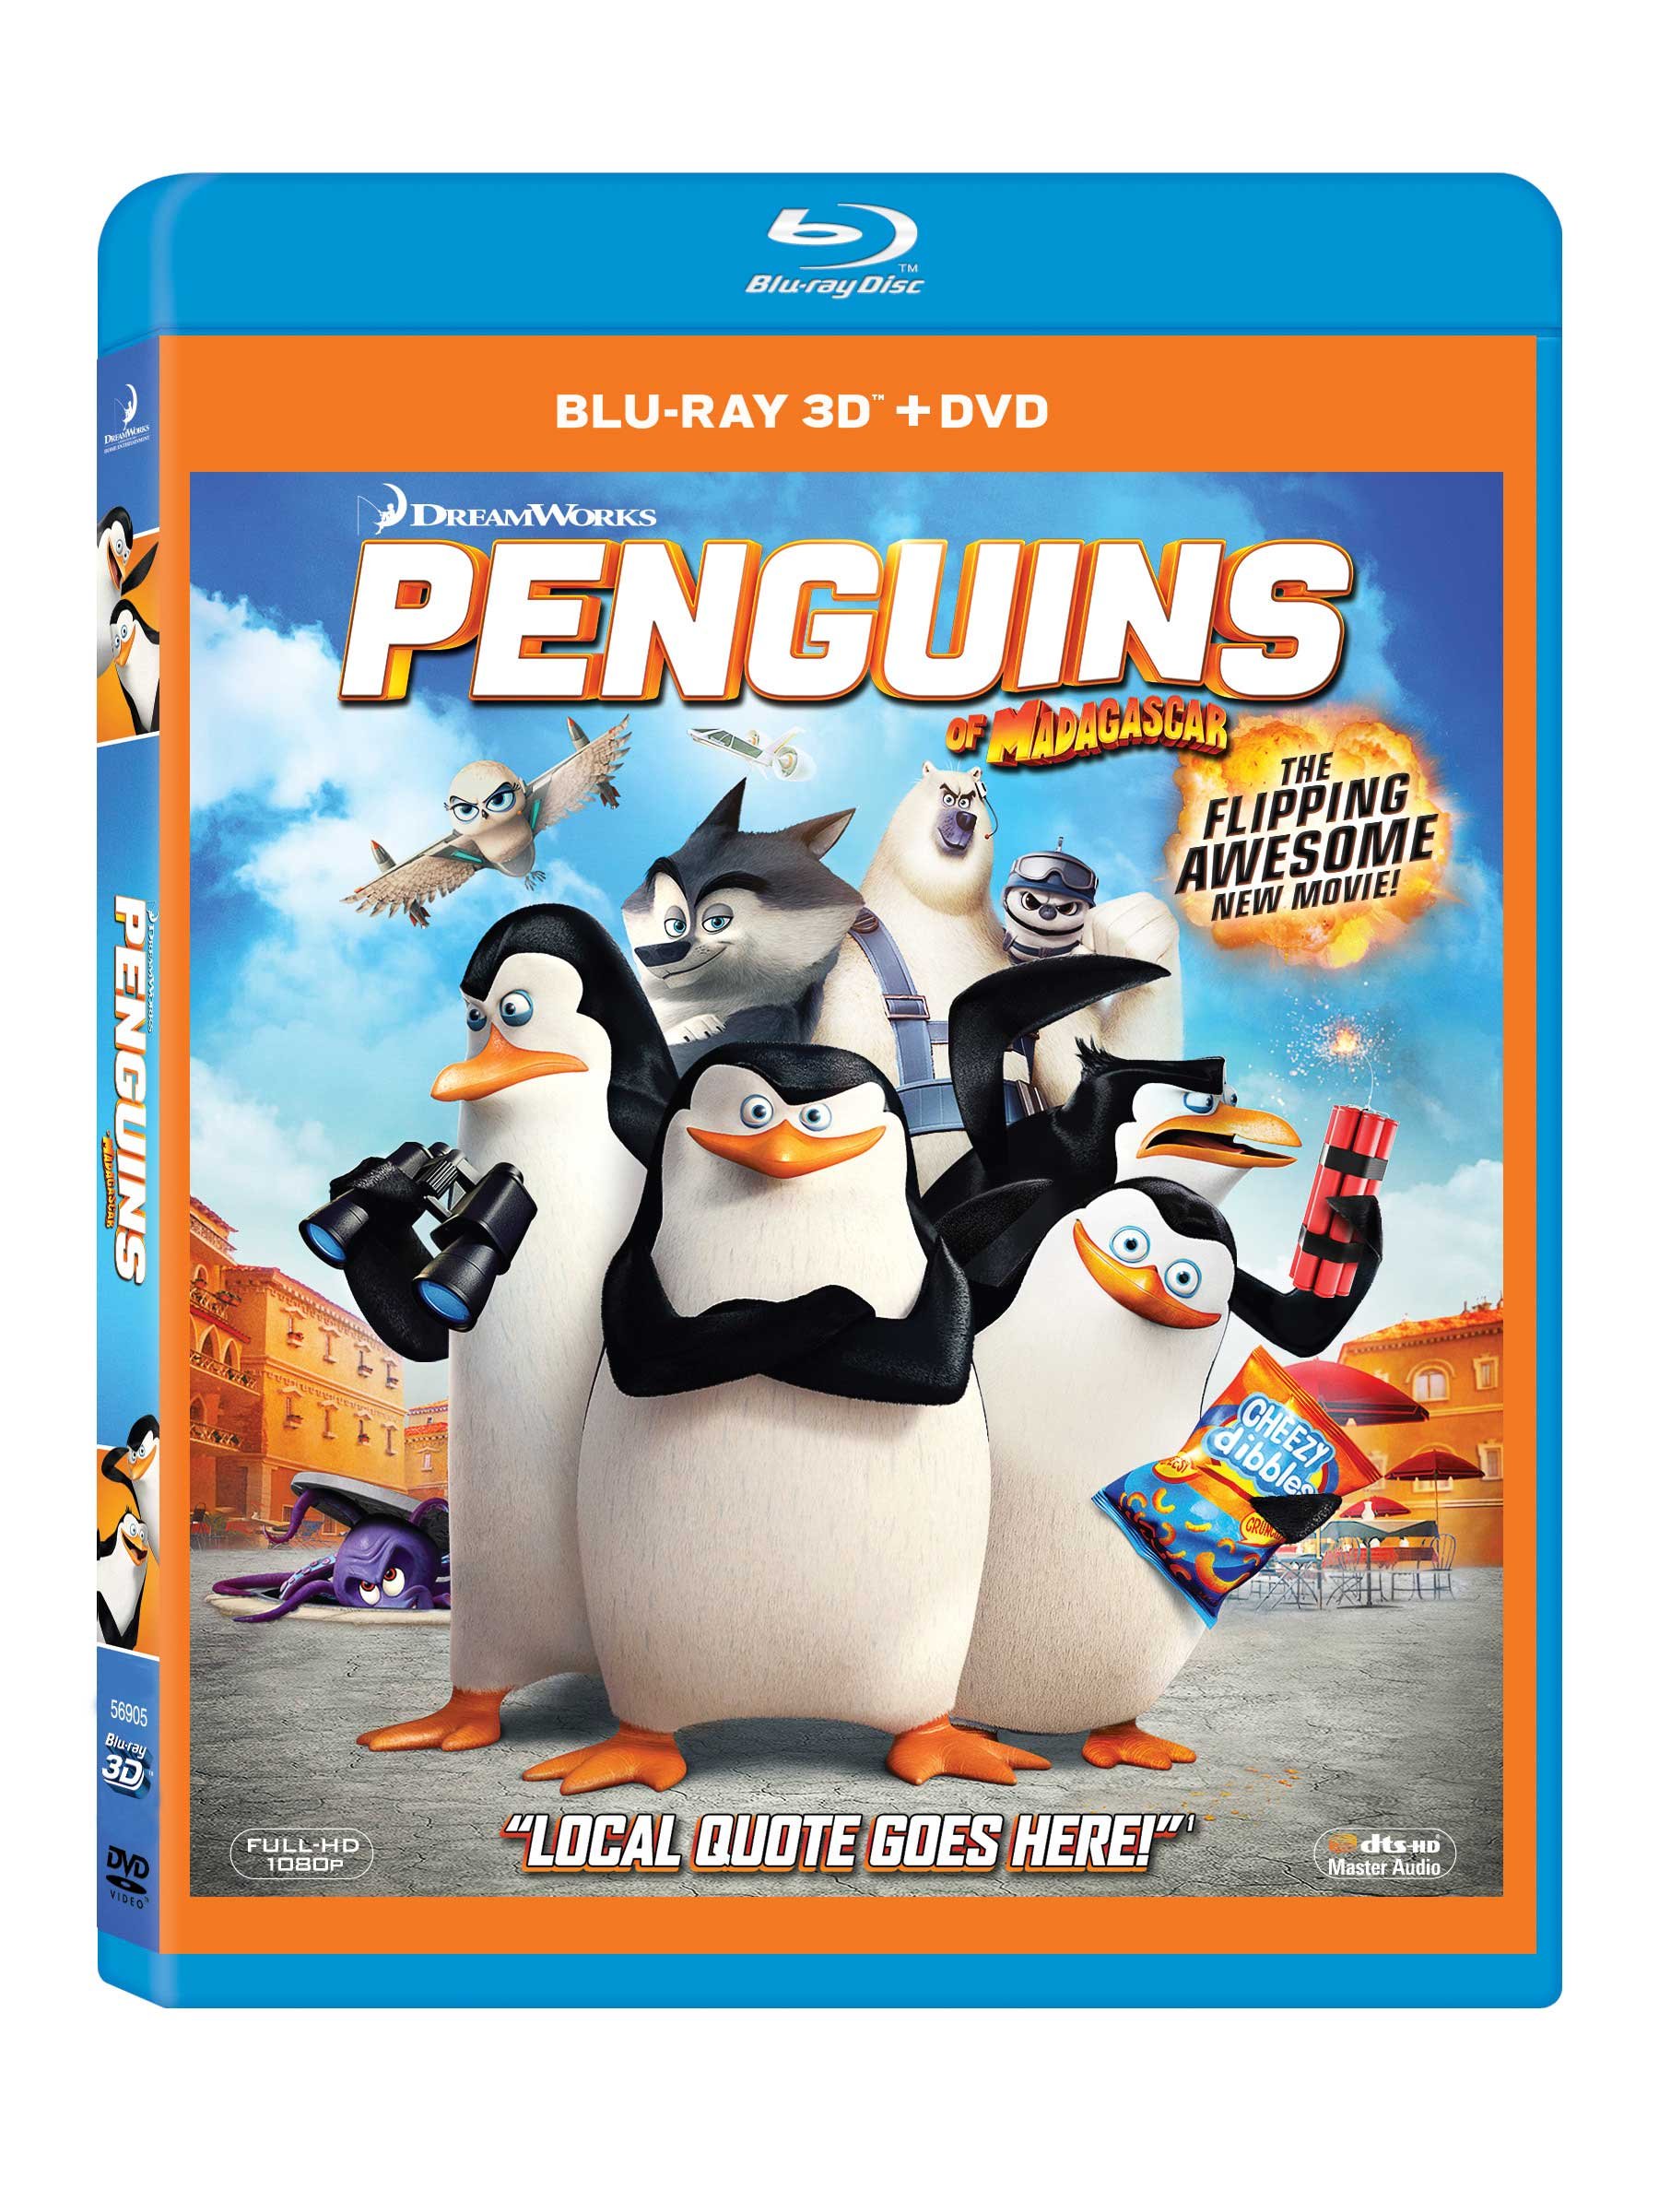 penguins-of-madagascar-3d-blu-ray-movie-purchase-or-watch-on